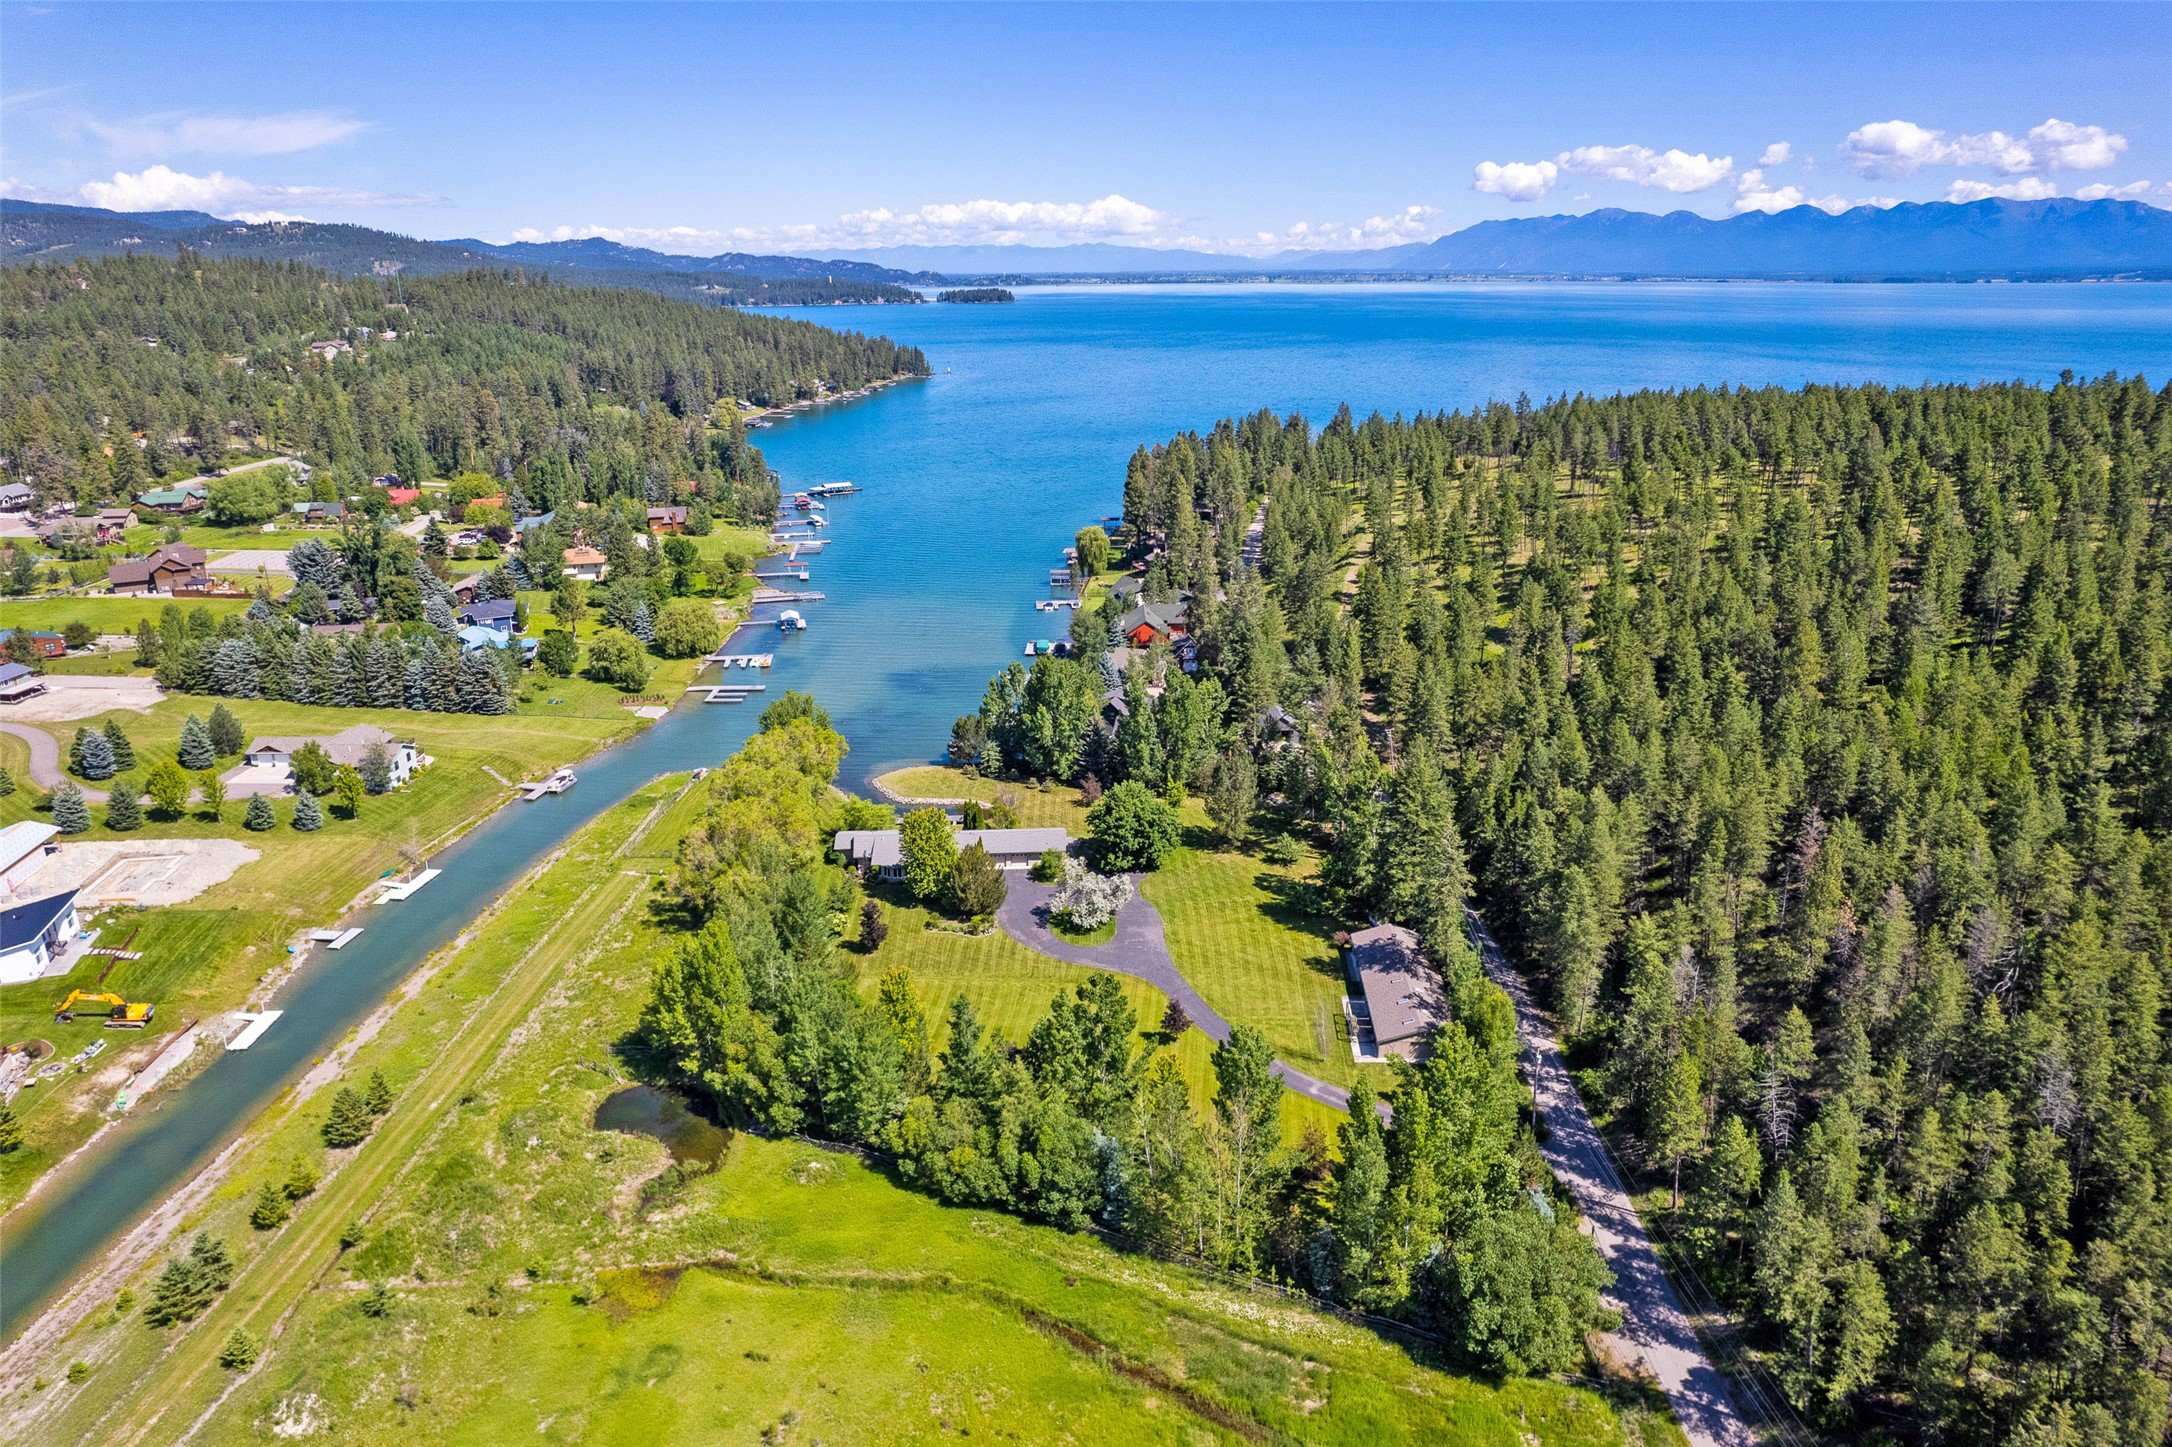 Embrace the tranquility of this rare 3.5+ acre waterfront property on Flathead Lake. Boasting 450+ feet of lake frontage in Peaceful Bay you will enjoy unparalleled views spanning from Caroline Point to Somers Bay and North Fork. The estate comprises a 2,683 sq.ft. main house, meticulously remodeled and expanded in 2009, featuring an open floor plan with remarkable views from every room. The kitchen is fitted with state-of-the-art appliances, Caesarstone quartz countertops, a UV water filter system and a walk-in pantry. The spacious living area, bathed in natural light, showcases a floor-to-ceiling stone propane fireplace and a 4-season sunroom with beautiful views of the yard and gardens. There are four bedrooms, including a master suite with a large walk-in closet, and a luxurious jetted tub in the master bath. Bathroom facilities are contemporary, featuring quartz and granite countertops and heated ceramic tile flooring. A versatile 1536 sq.ft. barn provides a workshop and office, complemented by a heated 2.5 car garage for all your storage needs. The guest house has a full kitchen and bath which also offers impressive lake views. Exterior features include an attached extra-long garage, 2 RV spots with hookups, 2 docks, and a private cove entrance. This one-of-a-kind estate epitomizes lakeside living at its finest, a sanctuary of peace and beauty that is both personal and timeless. Call Mark Kuhl (406) 407-7509 or your Real Estate Professional.